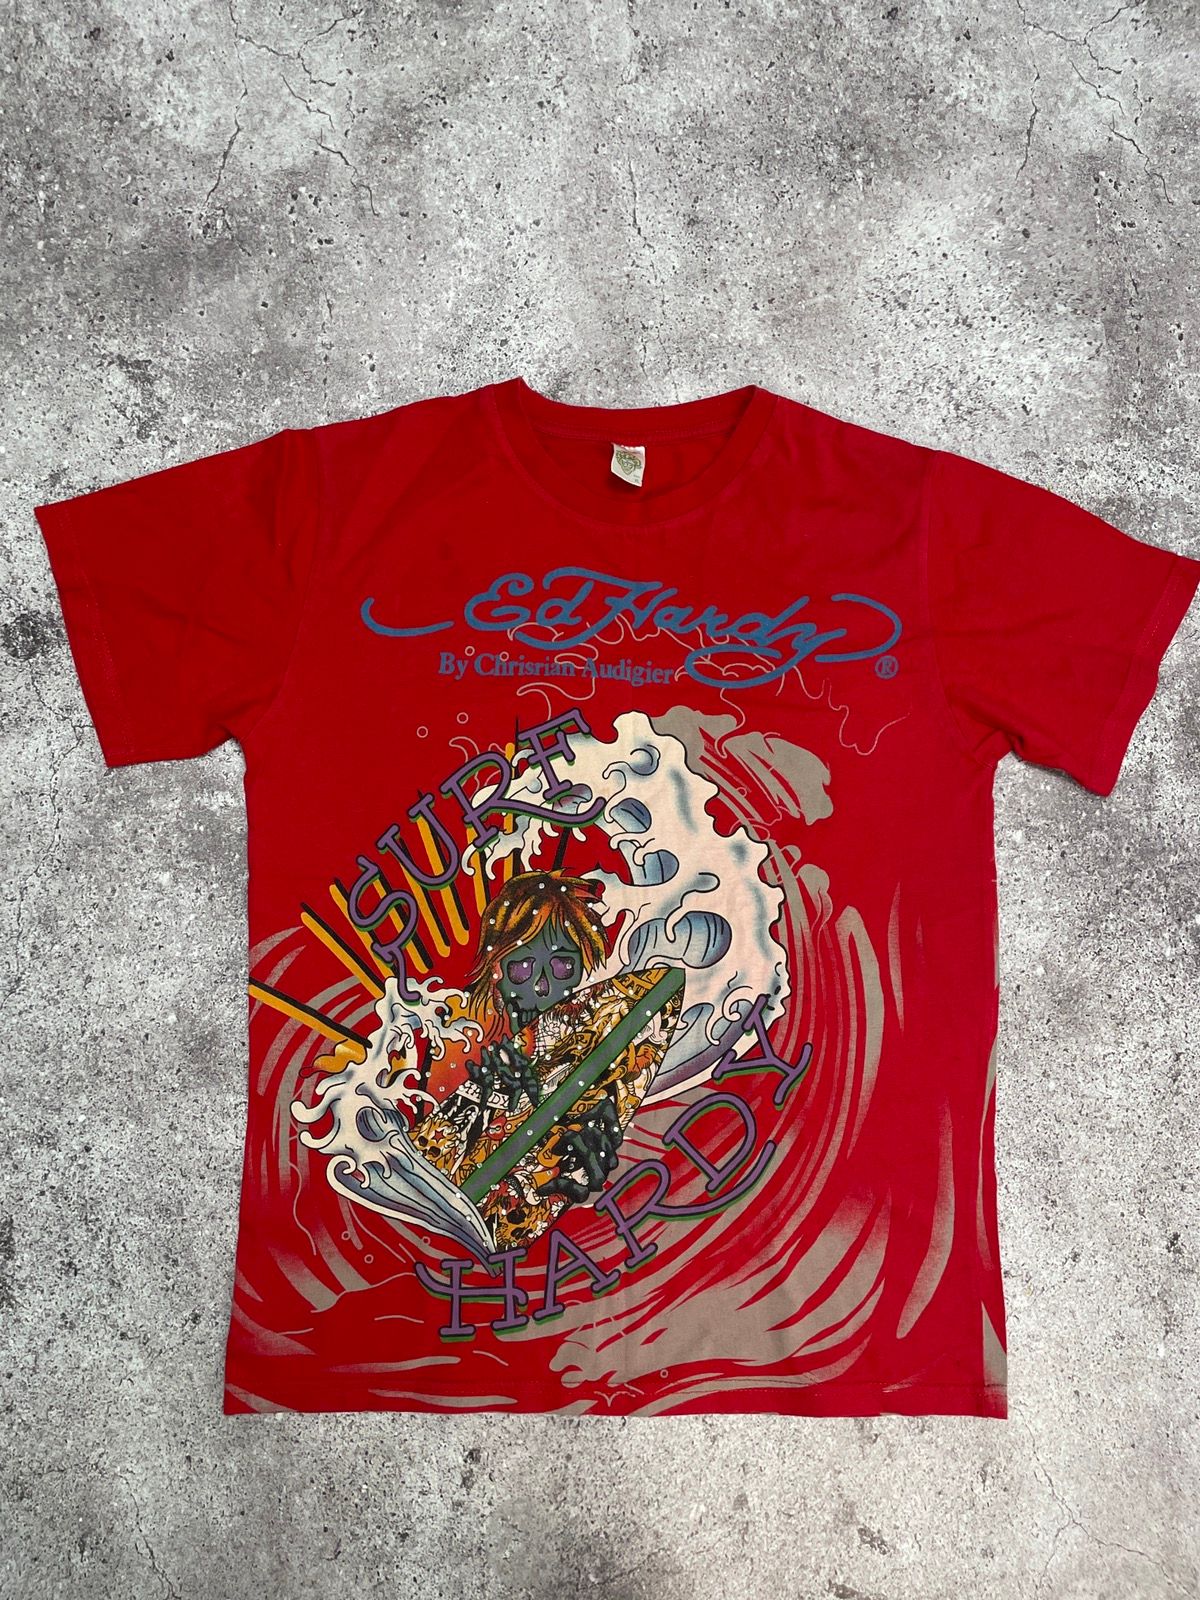 Pre-owned Christian Audigier X Ed Hardy Vintage Ed Hardy Shirt Jersey Tee Y2k Hype Drill In Red